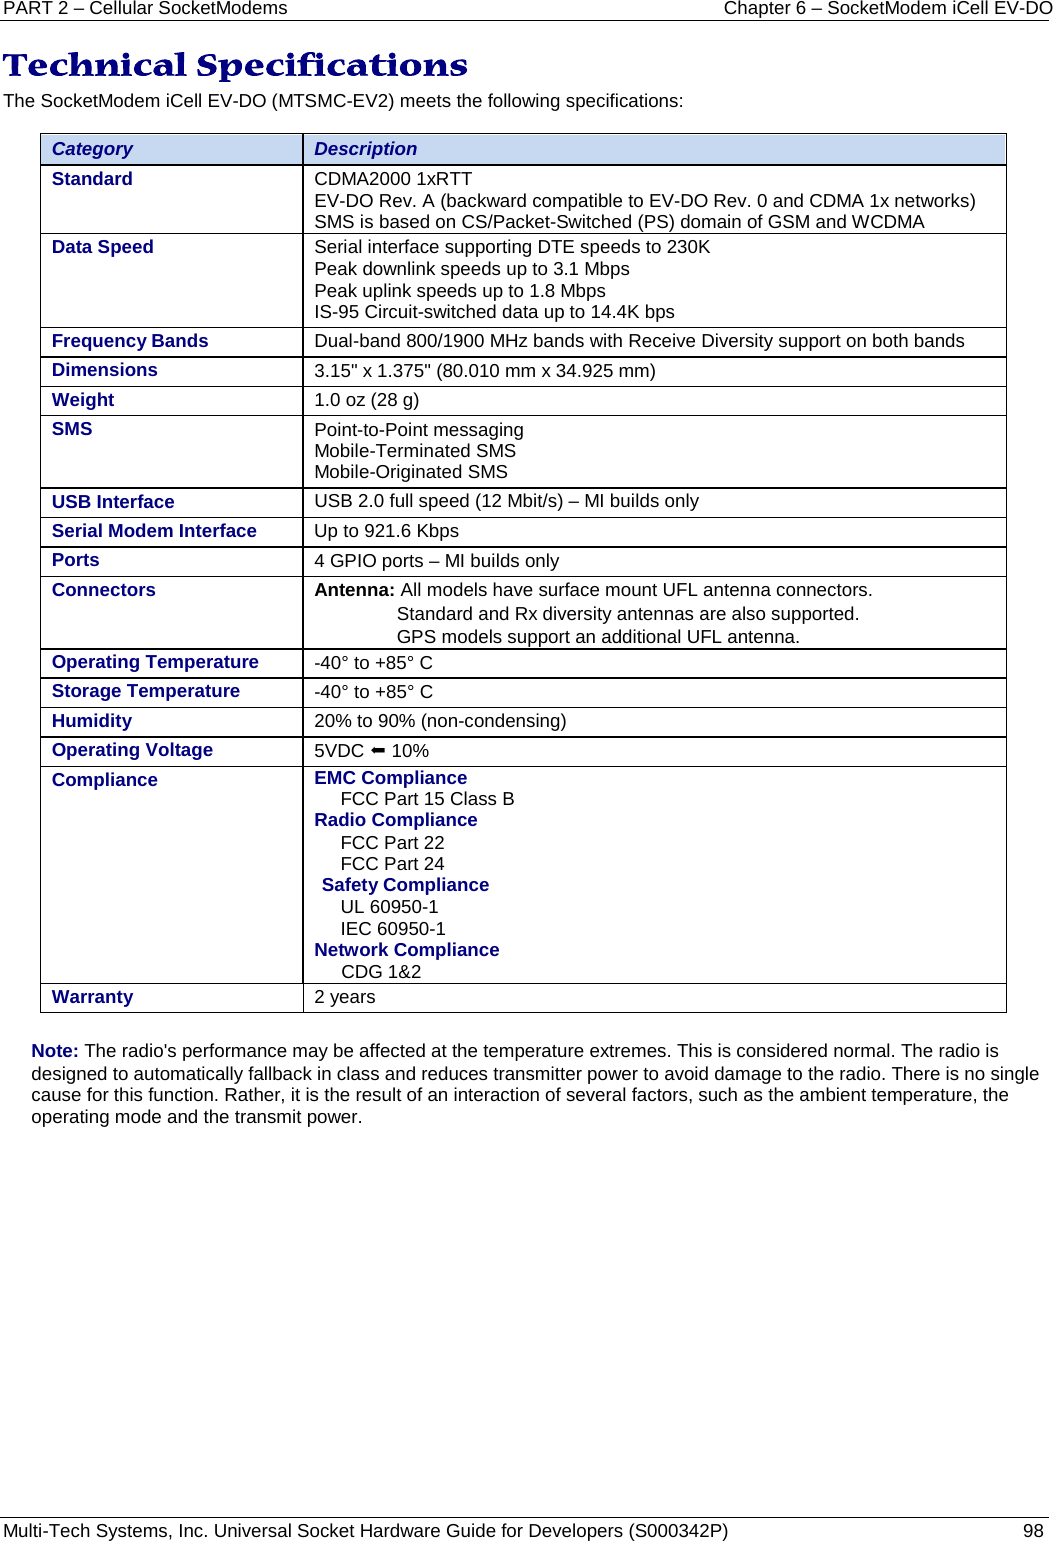 PART 2 – Cellular SocketModems Chapter 6 – SocketModem iCell EV-DO Multi-Tech Systems, Inc. Universal Socket Hardware Guide for Developers (S000342P)  98  Technical Specifications The SocketModem iCell EV-DO (MTSMC-EV2) meets the following specifications:   Category Description Standard  CDMA2000 1xRTT EV-DO Rev. A (backward compatible to EV-DO Rev. 0 and CDMA 1x networks) SMS is based on CS/Packet-Switched (PS) domain of GSM and WCDMA Data Speed Serial interface supporting DTE speeds to 230K Peak downlink speeds up to 3.1 Mbps  Peak uplink speeds up to 1.8 Mbps IS-95 Circuit-switched data up to 14.4K bps Frequency Bands Dual-band 800/1900 MHz bands with Receive Diversity support on both bands Dimensions 3.15&quot; x 1.375&quot; (80.010 mm x 34.925 mm)   Weight 1.0 oz (28 g) SMS  Point-to-Point messaging Mobile-Terminated SMS Mobile-Originated SMS USB Interface USB 2.0 full speed (12 Mbit/s) – MI builds only Serial Modem Interface  Up to 921.6 Kbps  Ports  4 GPIO ports – MI builds only Connectors  Antenna: All models have surface mount UFL antenna connectors. Standard and Rx diversity antennas are also supported.  GPS models support an additional UFL antenna. Operating Temperature -40° to +85° C   Storage Temperature -40° to +85° C   Humidity 20% to 90% (non-condensing) Operating Voltage 5VDC  10% Compliance EMC Compliance  FCC Part 15 Class B Radio Compliance FCC Part 22 FCC Part 24 Safety Compliance UL 60950-1 IEC 60950-1 Network Compliance  CDG 1&amp;2 Warranty 2 years   Note: The radio&apos;s performance may be affected at the temperature extremes. This is considered normal. The radio is designed to automatically fallback in class and reduces transmitter power to avoid damage to the radio. There is no single cause for this function. Rather, it is the result of an interaction of several factors, such as the ambient temperature, the operating mode and the transmit power.    